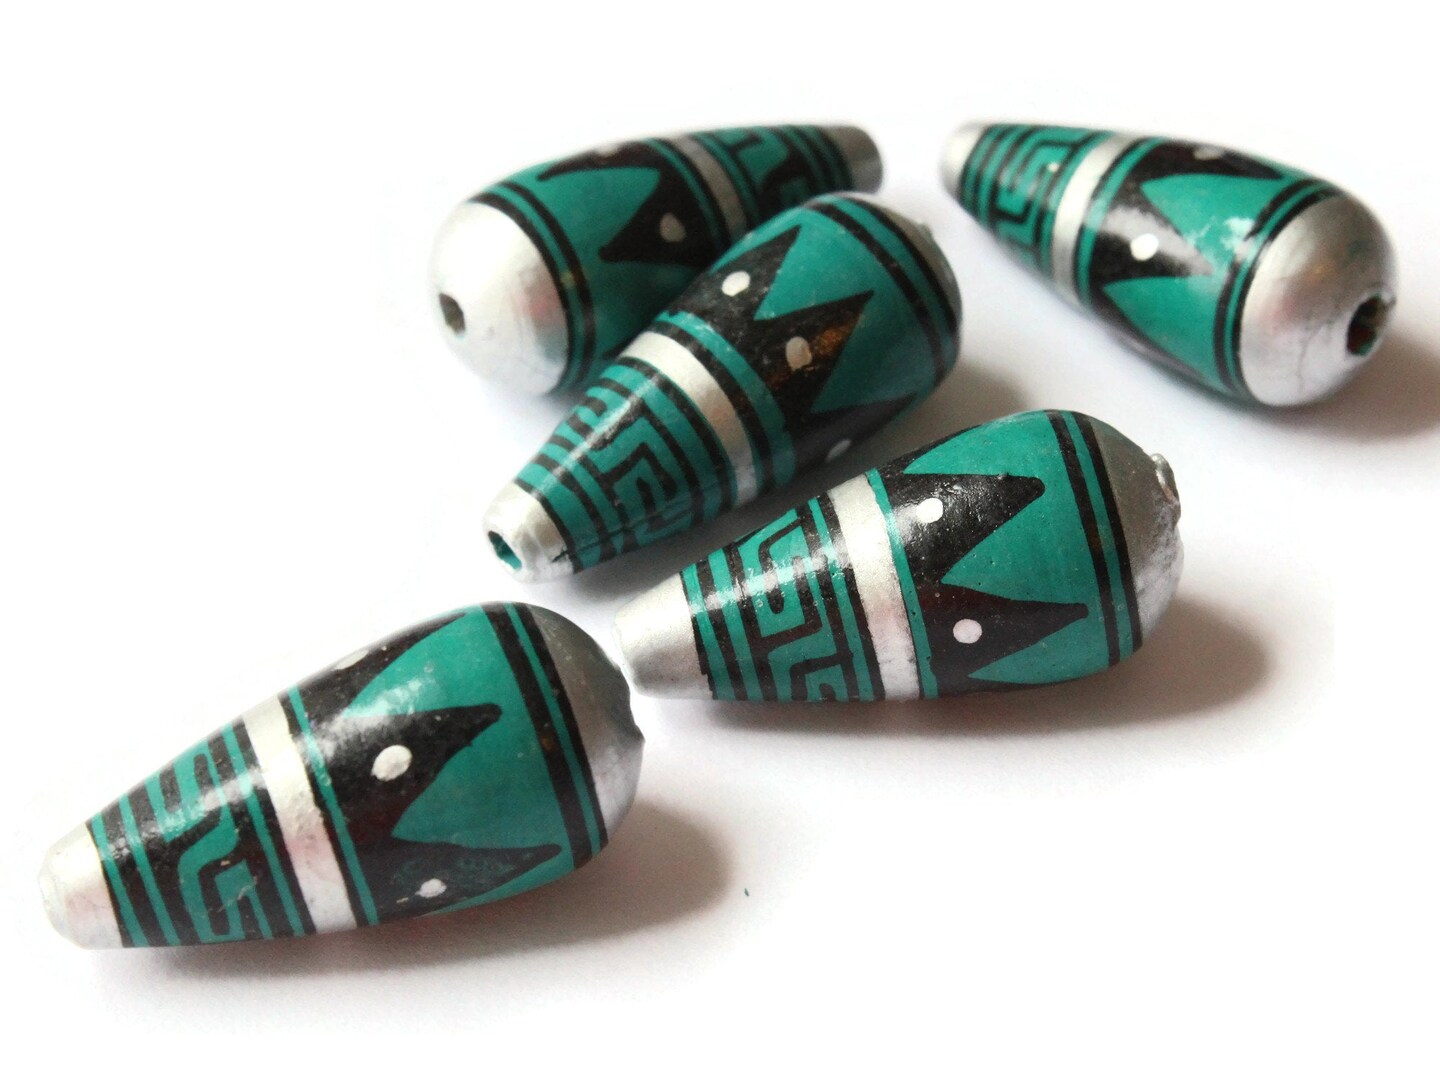 5 28mm Vintage Painted Peruvian Clay Beads - Teal, Silver, and Black Patterned Teardrop Beads